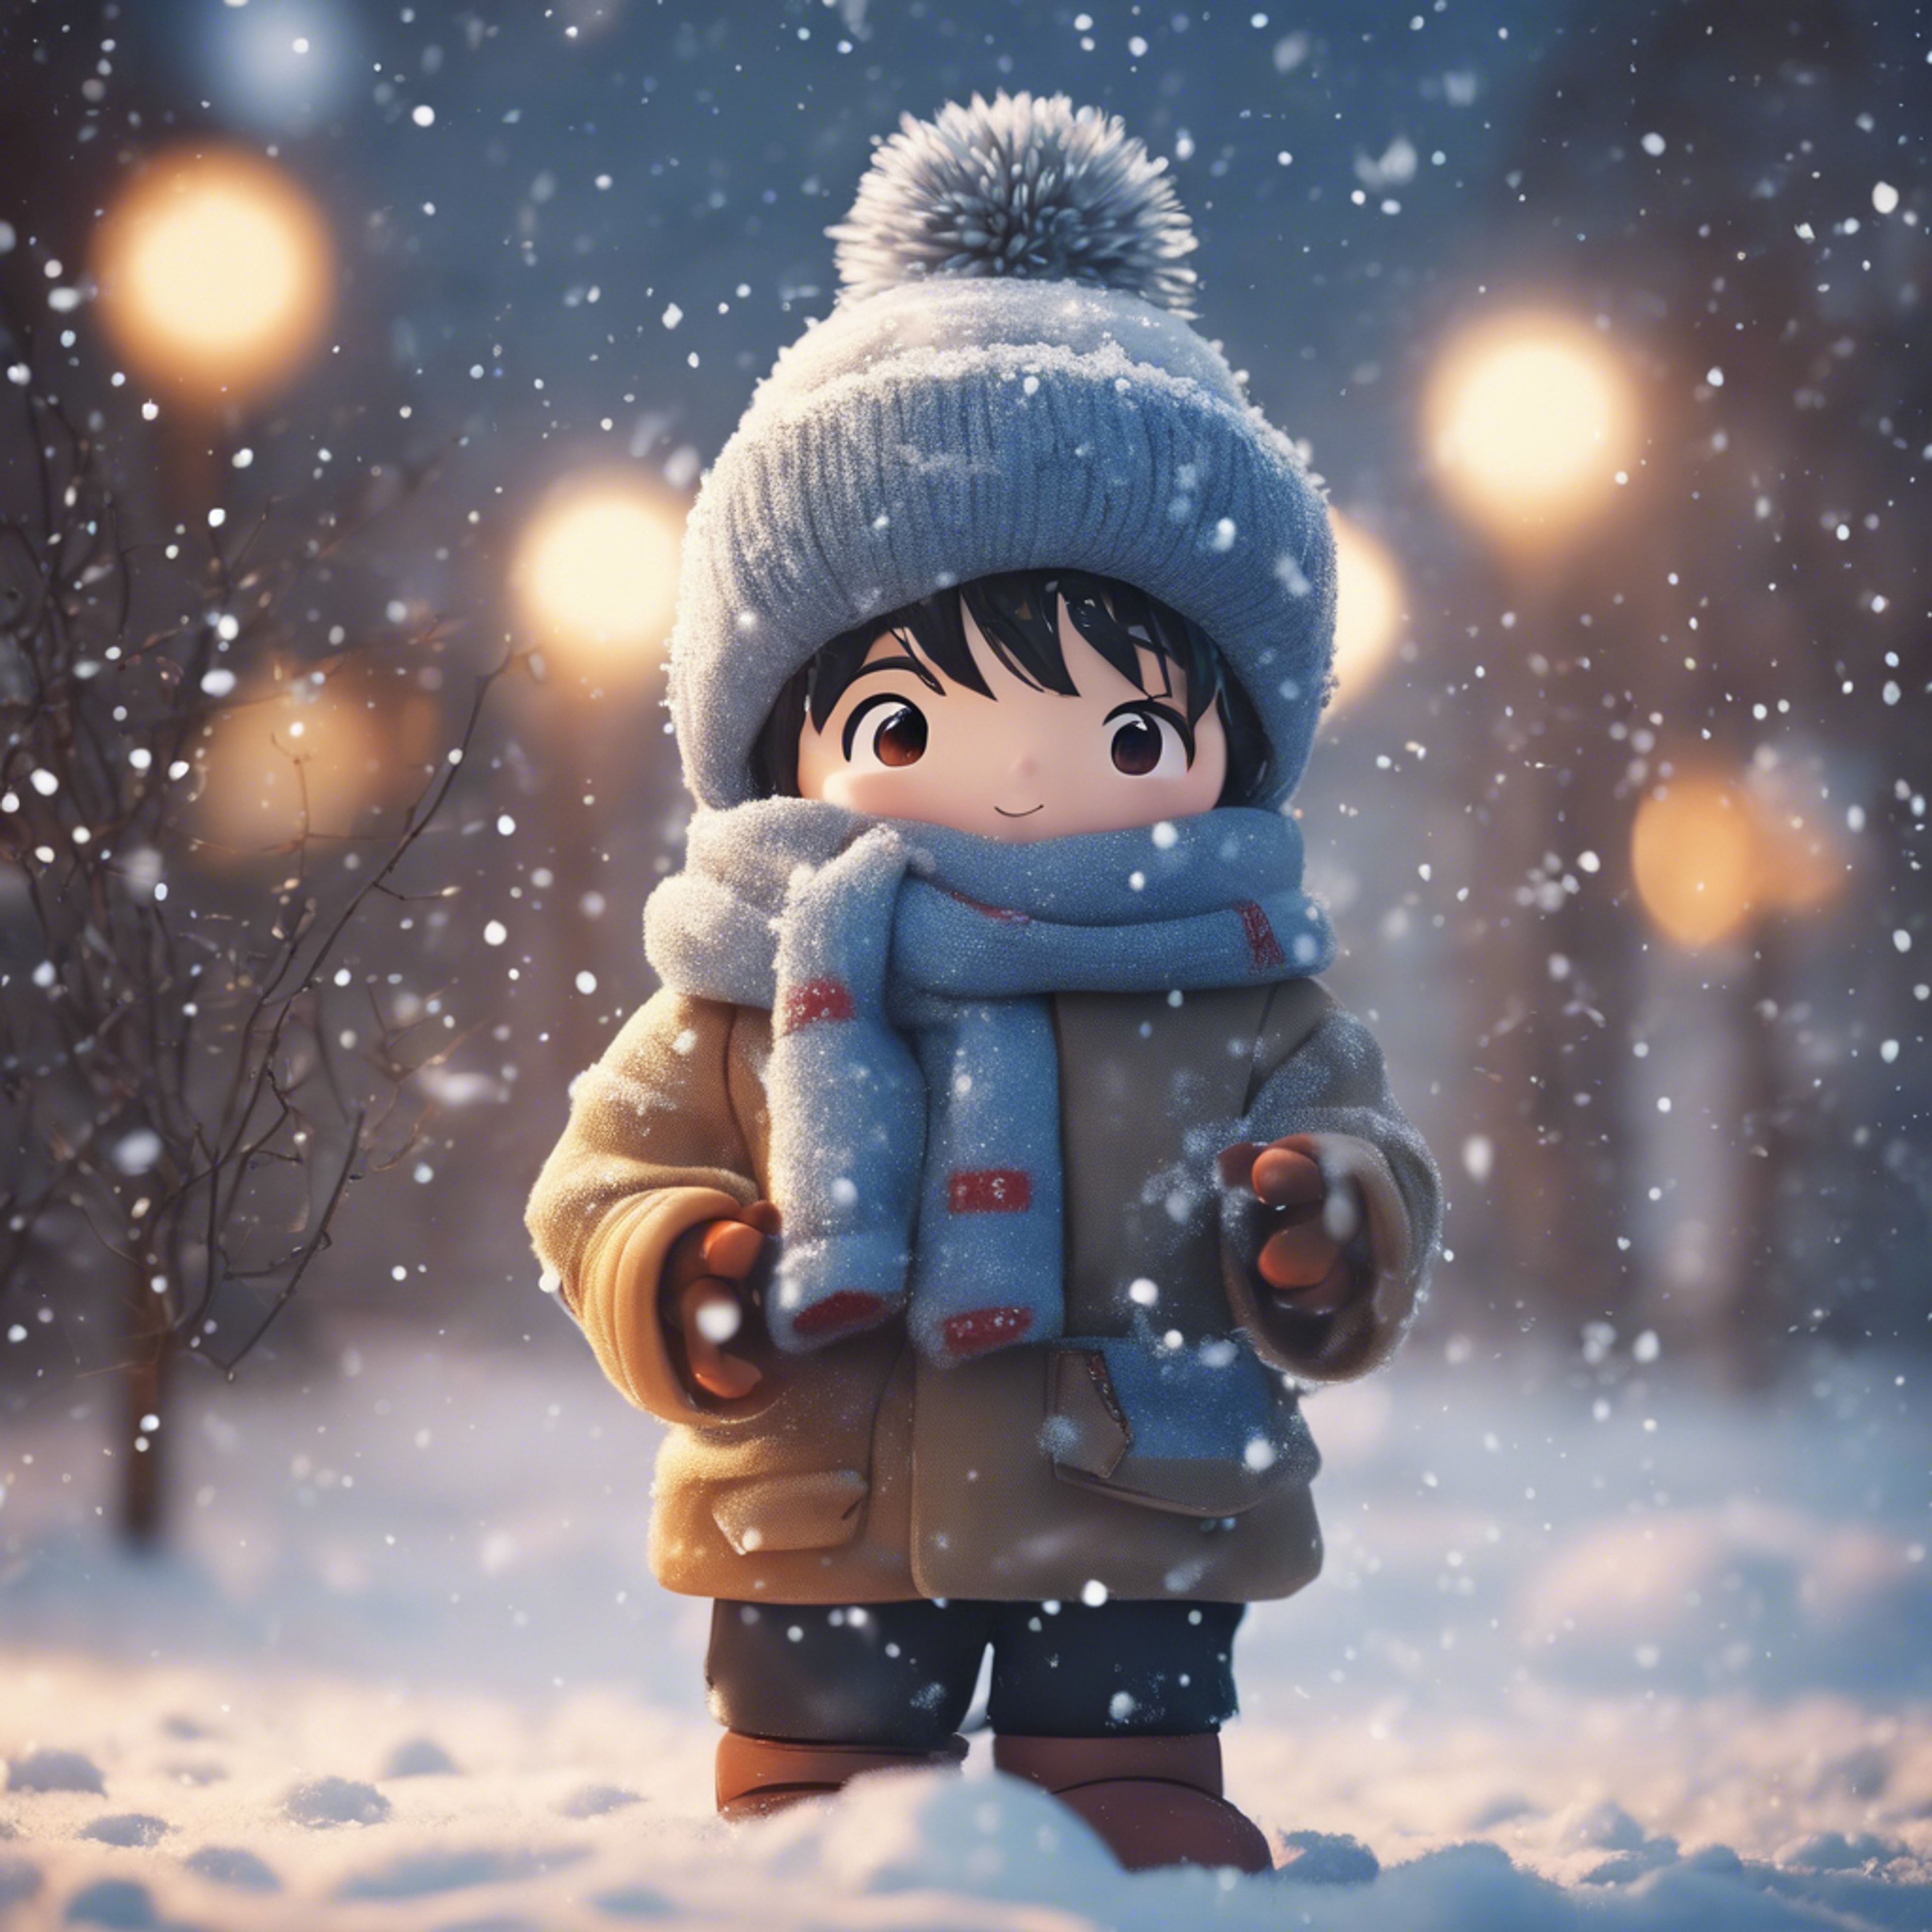 Anime boy wrapped in warm winter clothes, building a playful snowman in the snowfall. کاغذ دیواری[d4075dc9b13644f685e7]